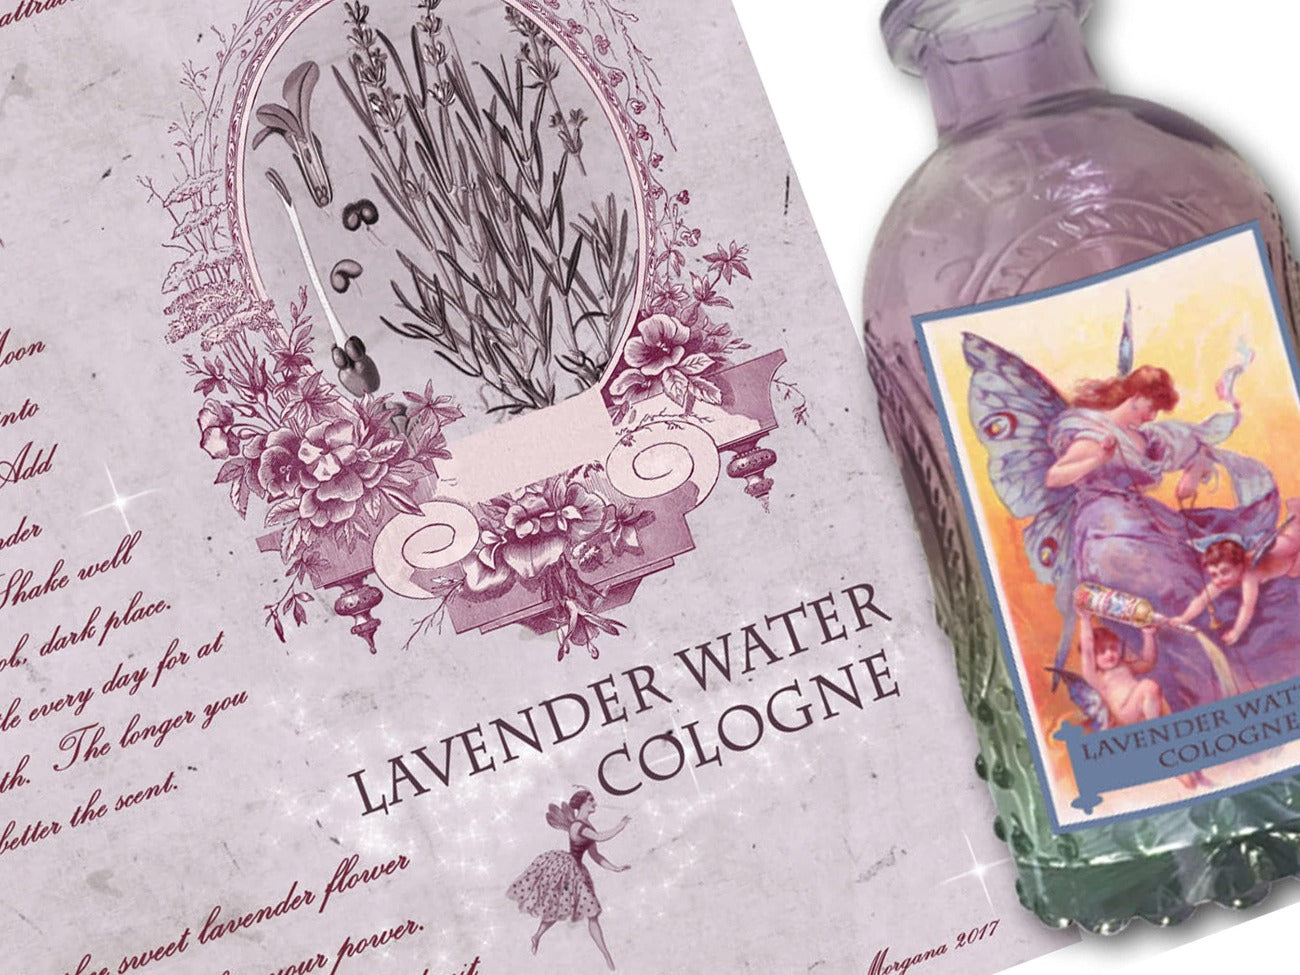 LAVENDER WATER COLOGNE, Recipe & Labels, Wicca Perfume Apothecary, Green Witch Witchcraft Aromatherapy, Kitchen Witch Herbal Apothecary - Morgana Magick Spell